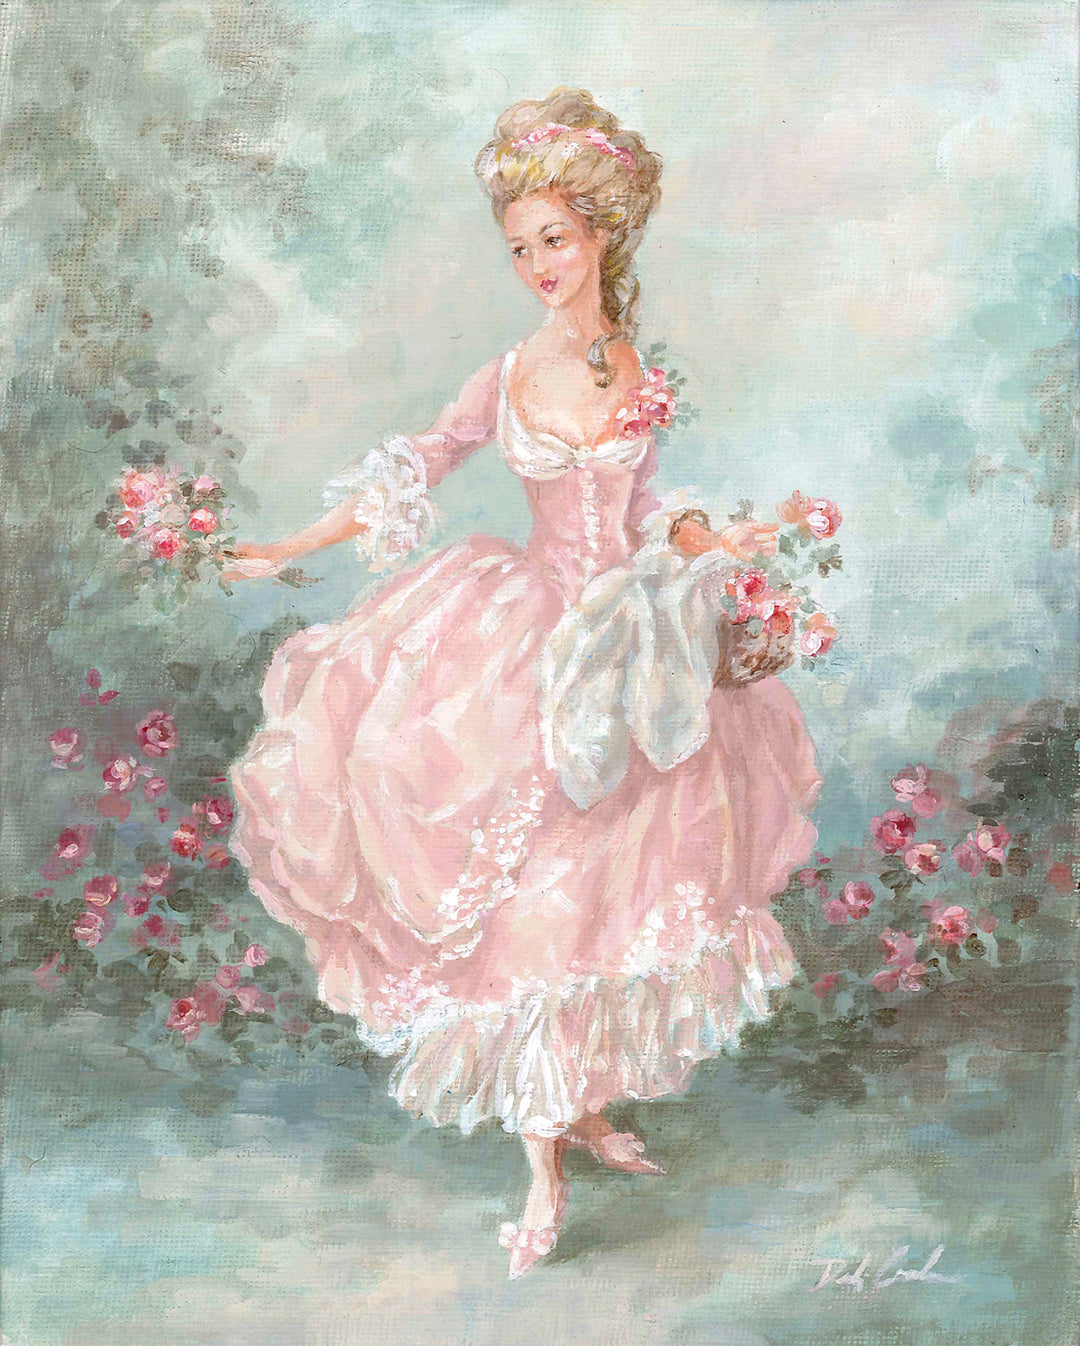 Vintage French fashion painting inspired by Marie Antoinette